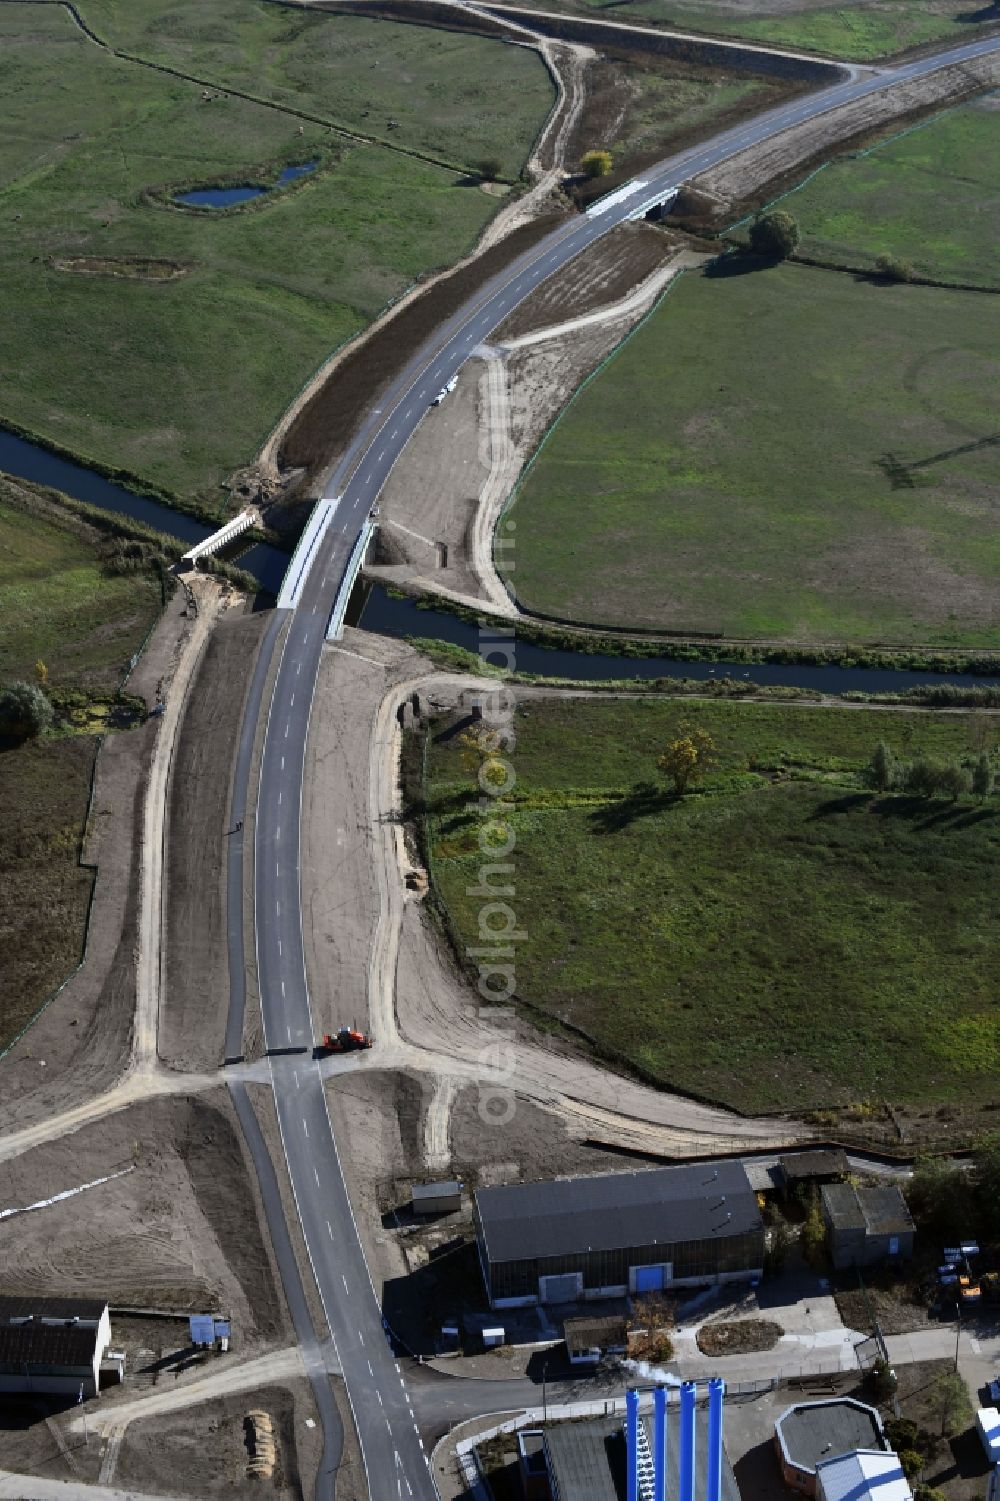 Aerial photograph Breese - Construction of the bypass road in in Breese in the state Brandenburg, Germany